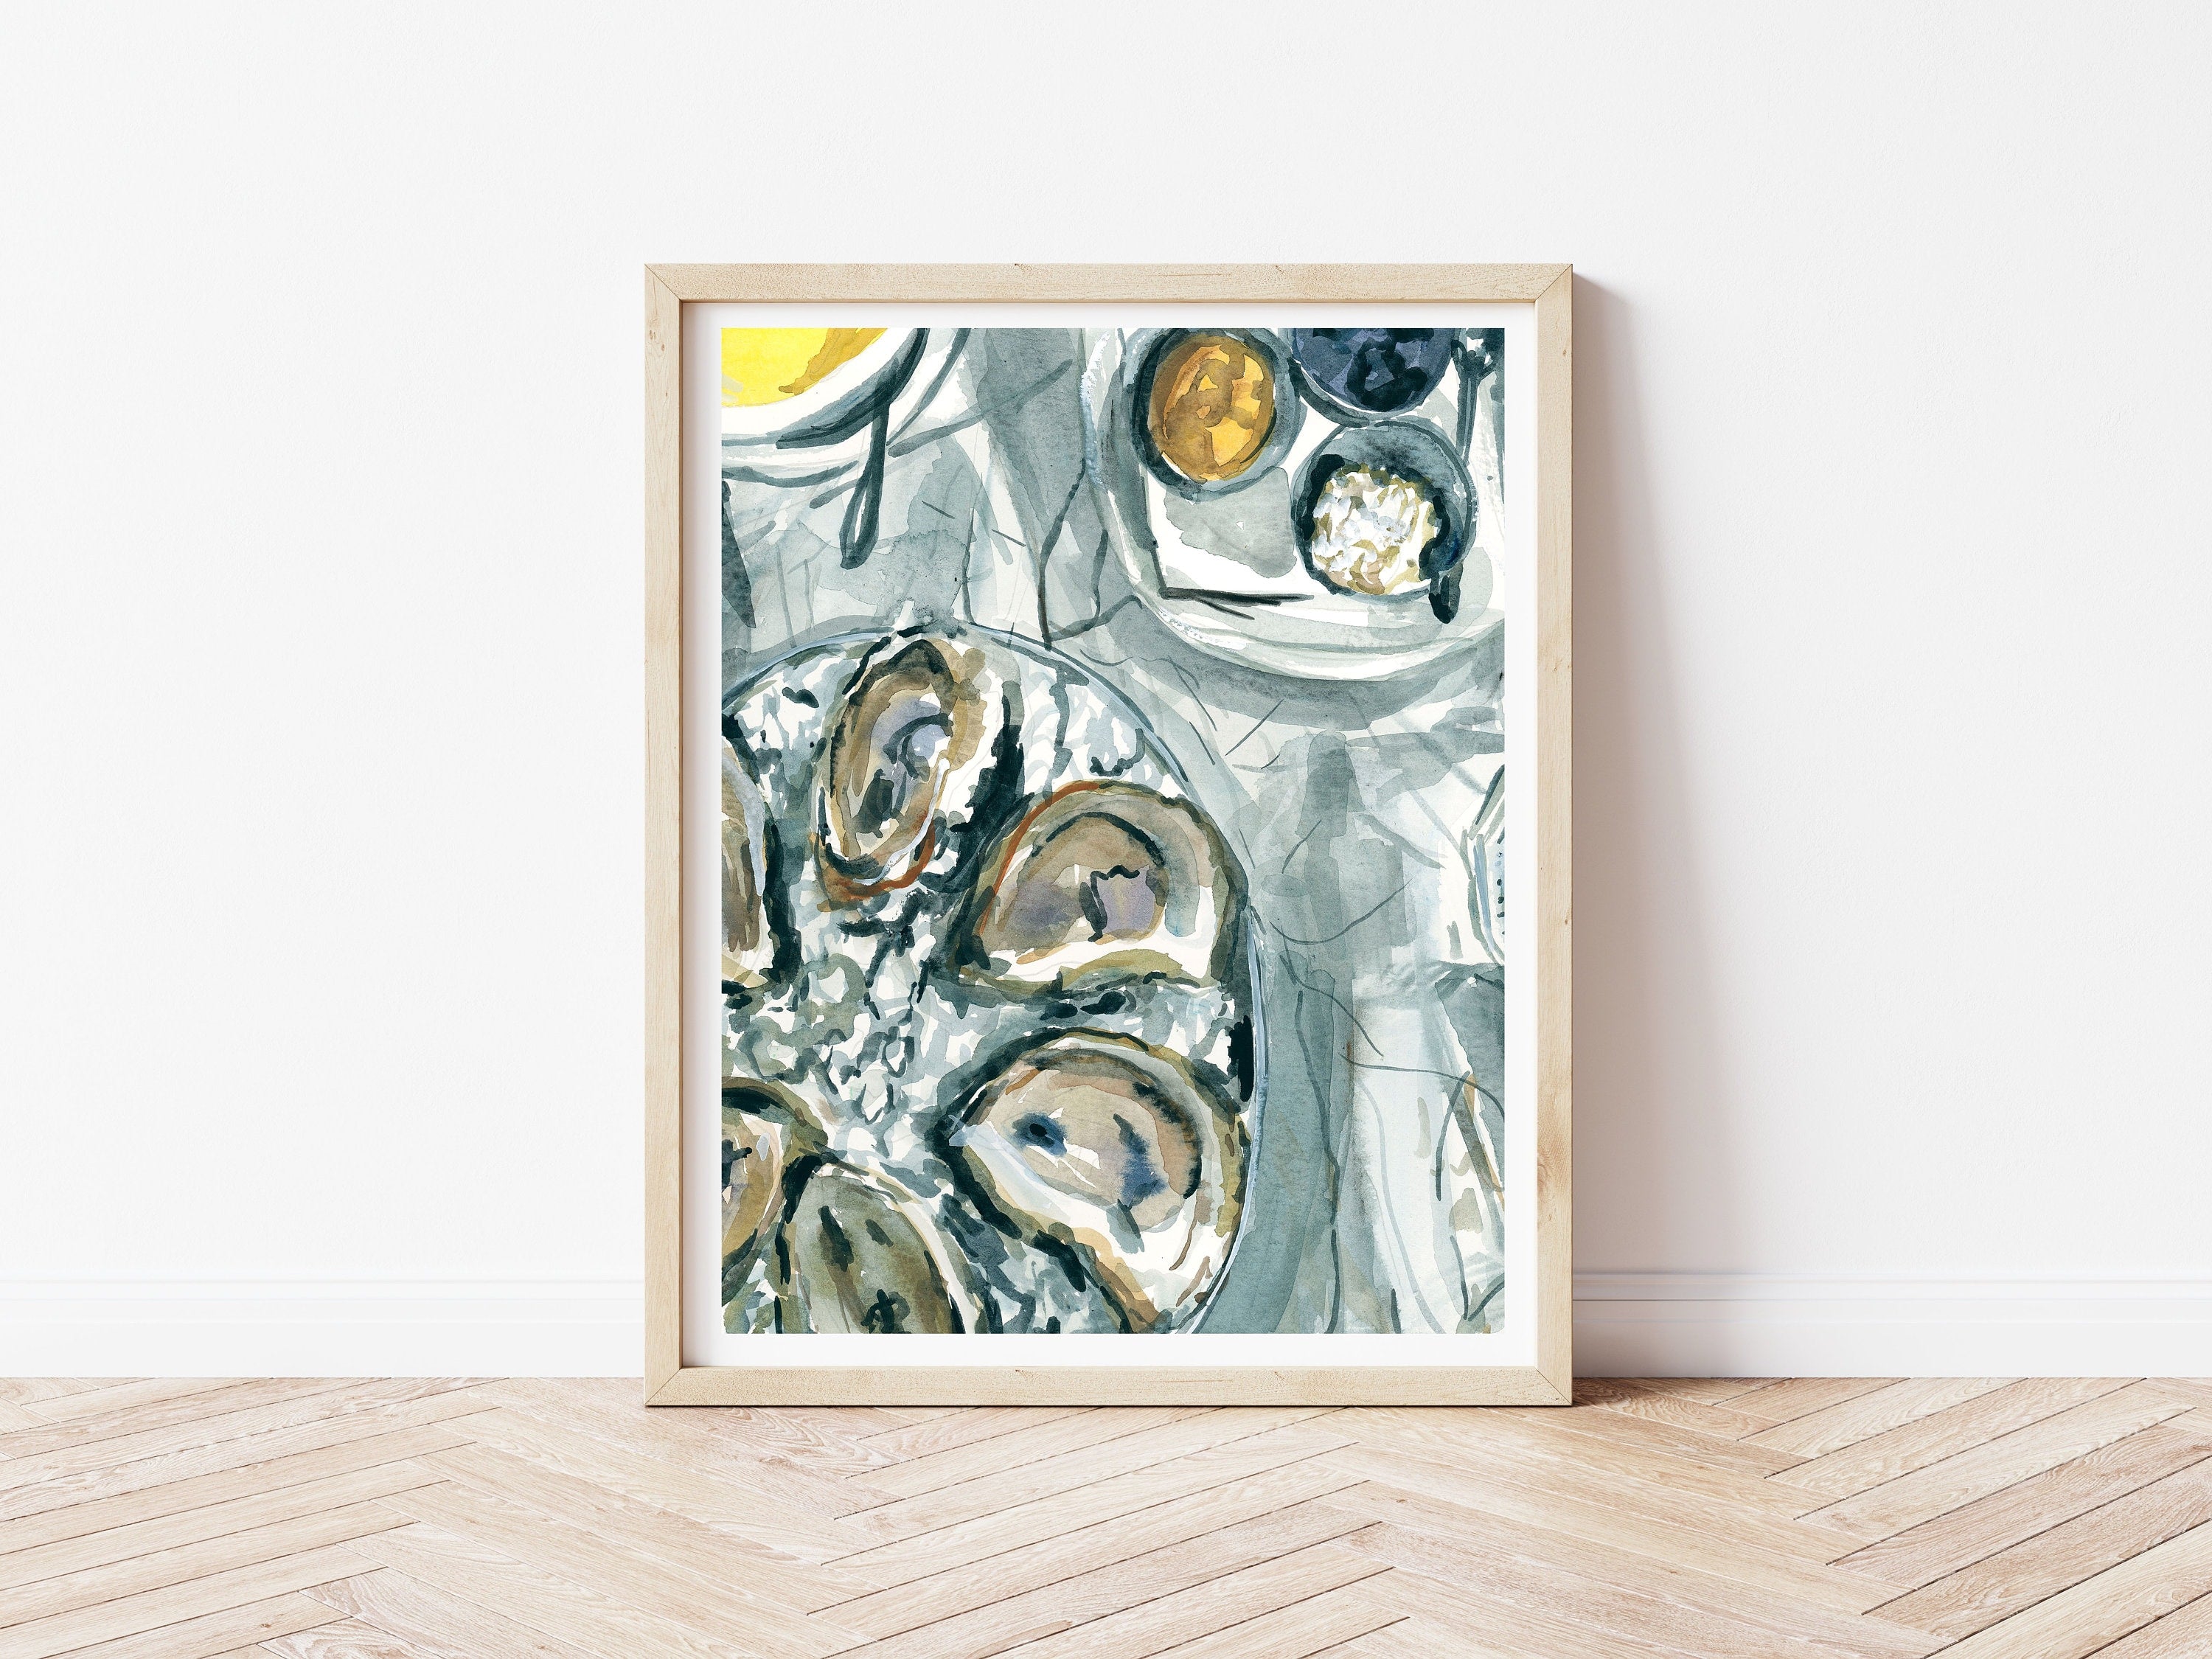 Grey-toned oyster painting print of painting by Medjool Studio. Print of original gouache painting of an oyster meal.